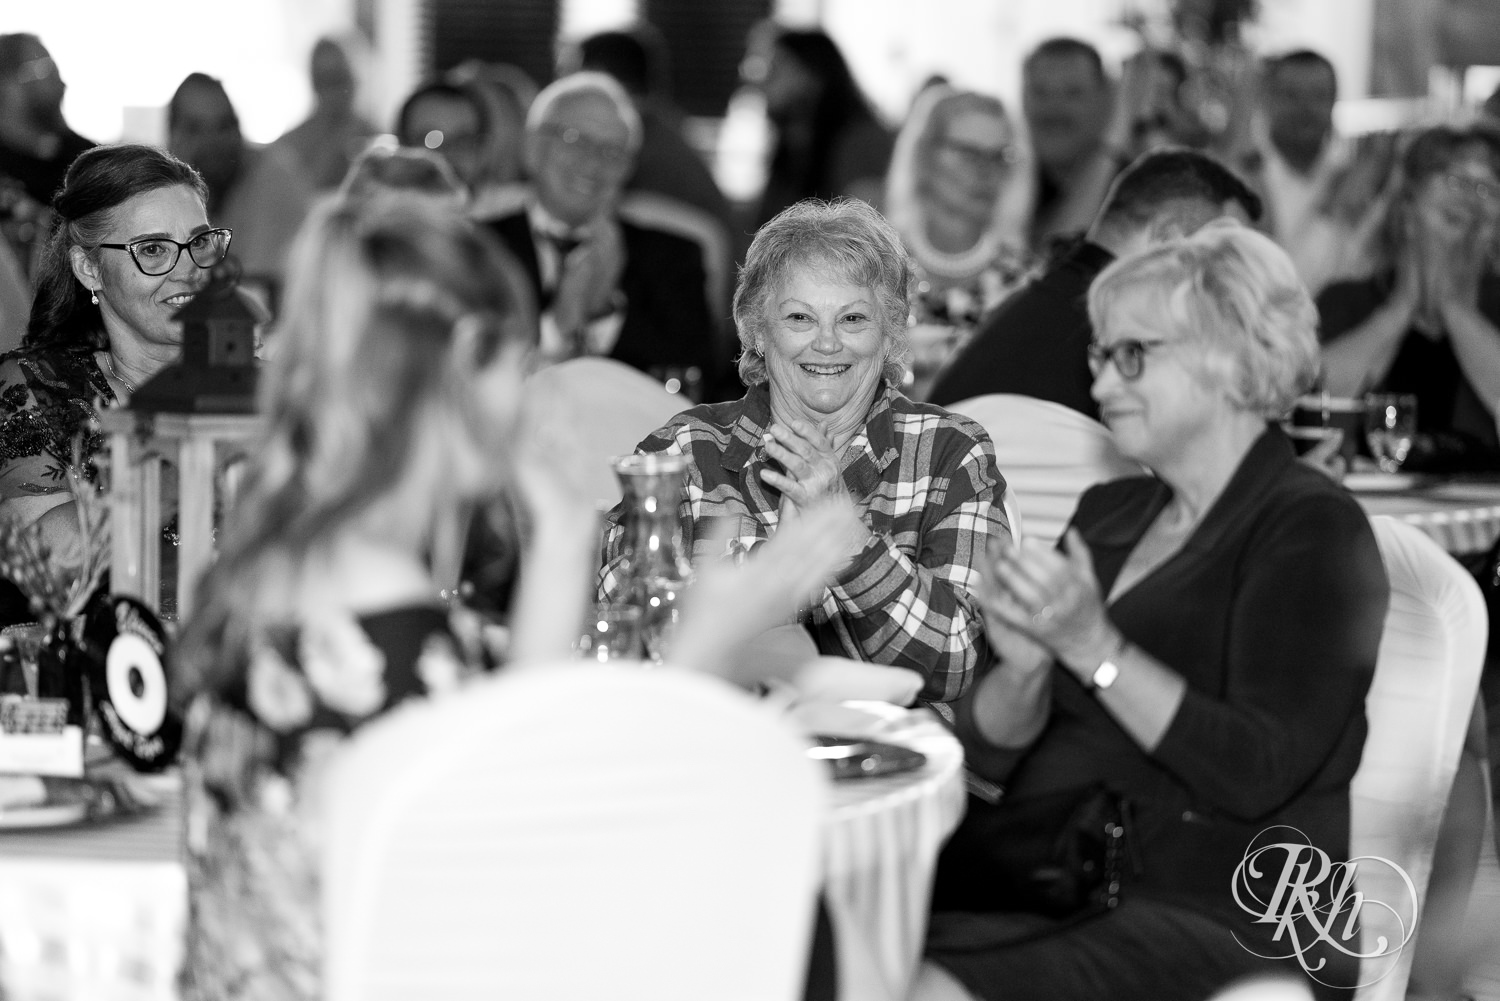 Guests laugh during speech at wedding reception at Kellerman's Event Center in White Bear Lake, Minnesota.